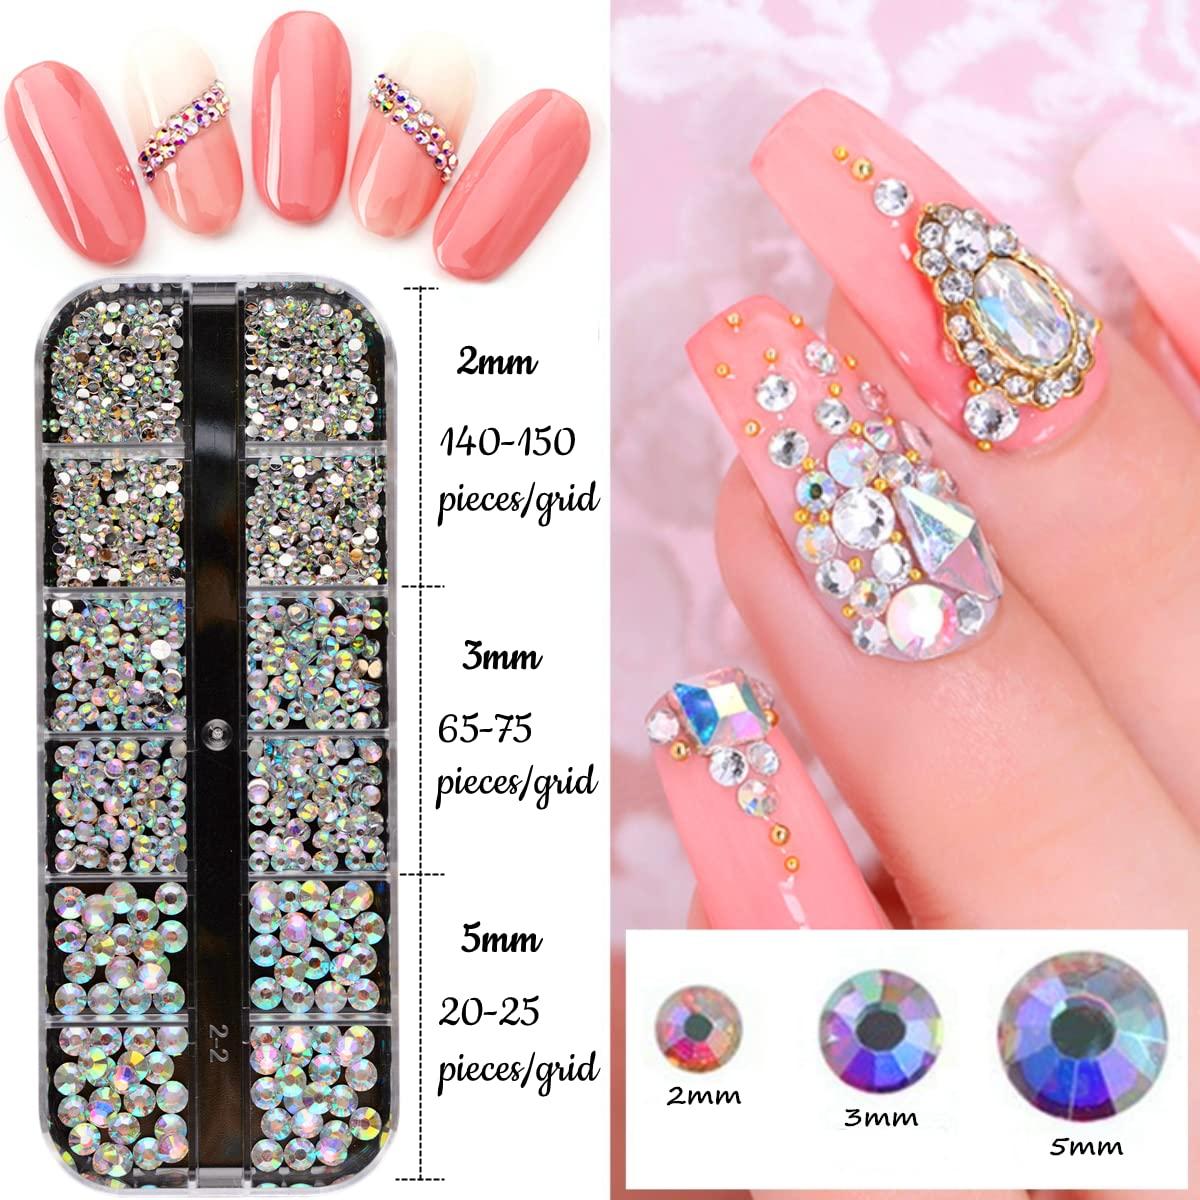 NAIL ART STONES & BEADS | Shopee Philippines-totobed.com.vn